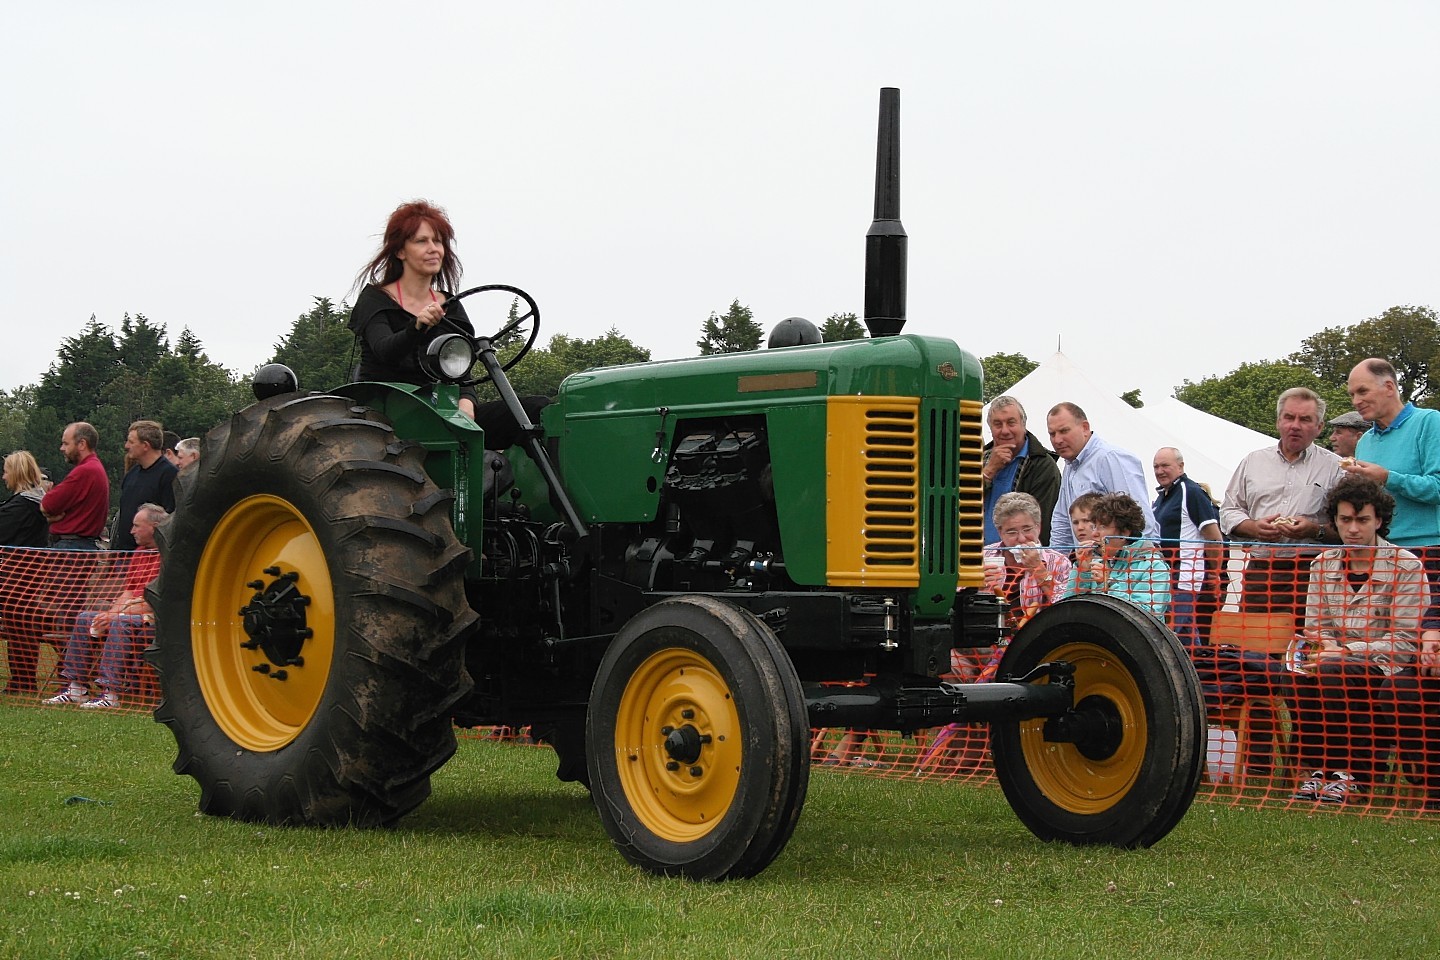 A Turner Yeoman of England diesel tractor on parade at a rally in Ayrshire